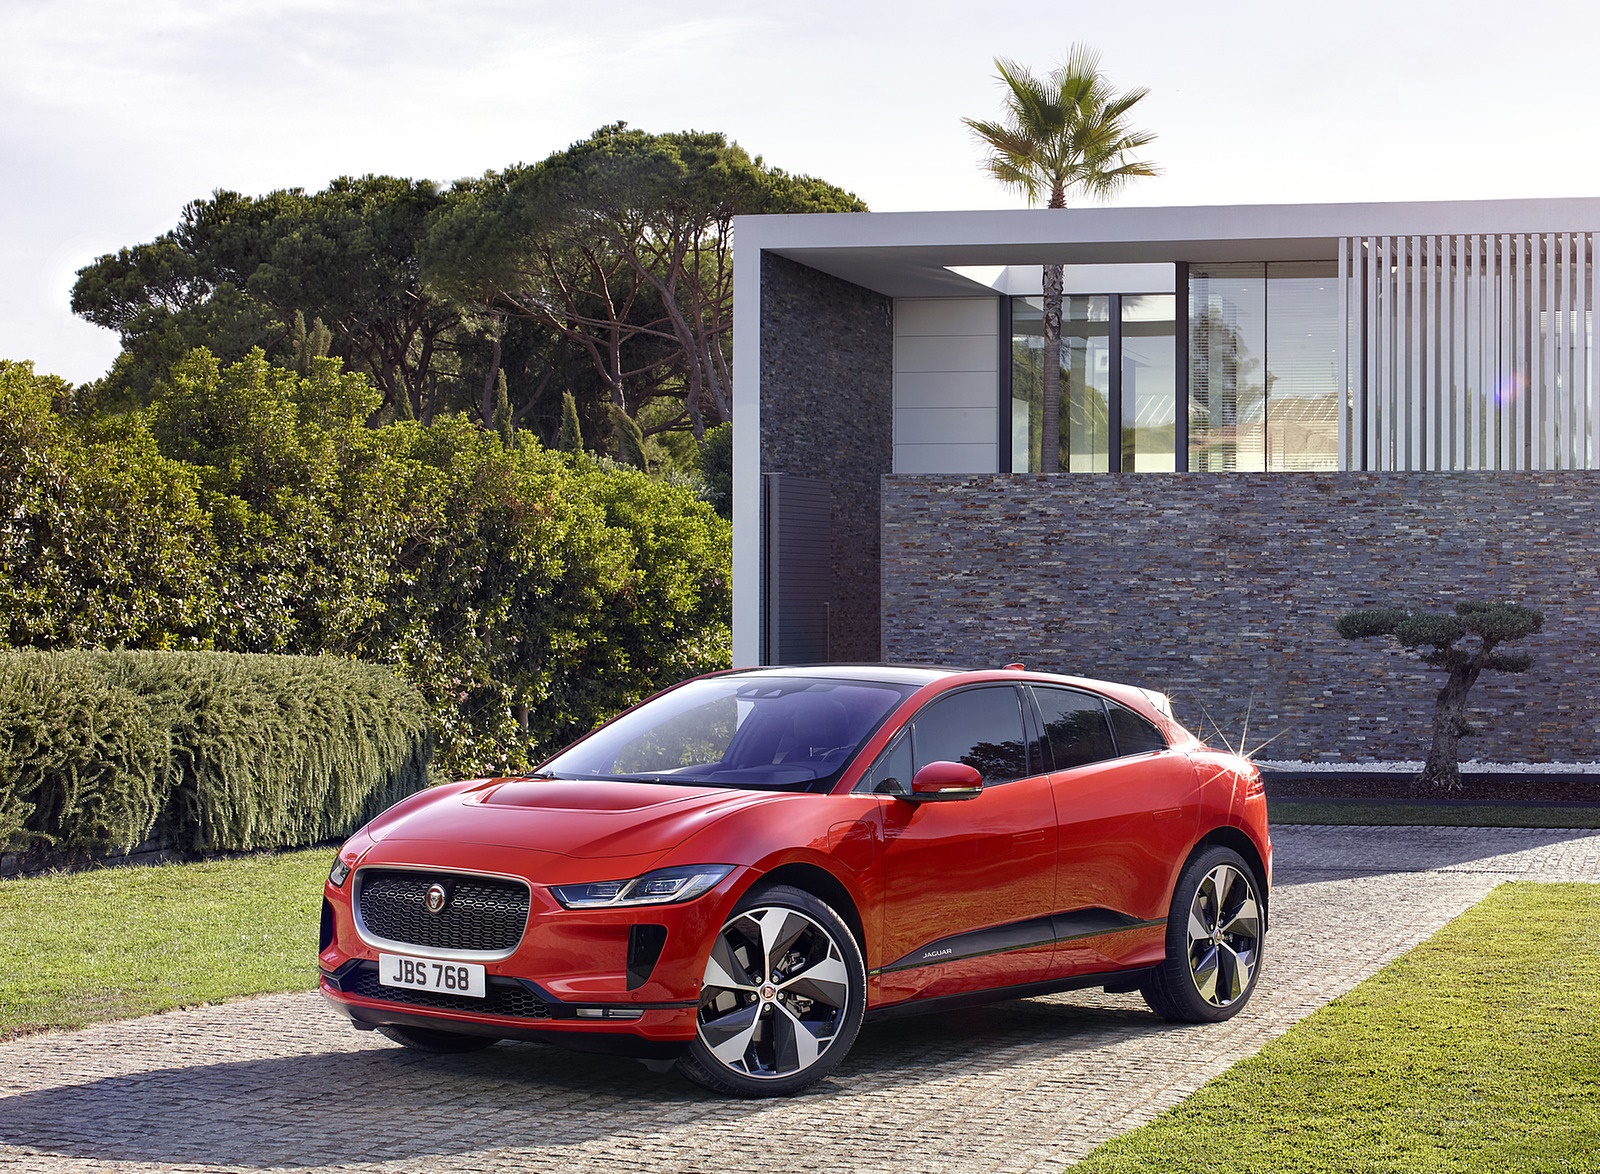 2019 Jaguar I-PACE (Color: Photon Red) Front Three-Quarter Wallpapers #88 of 192